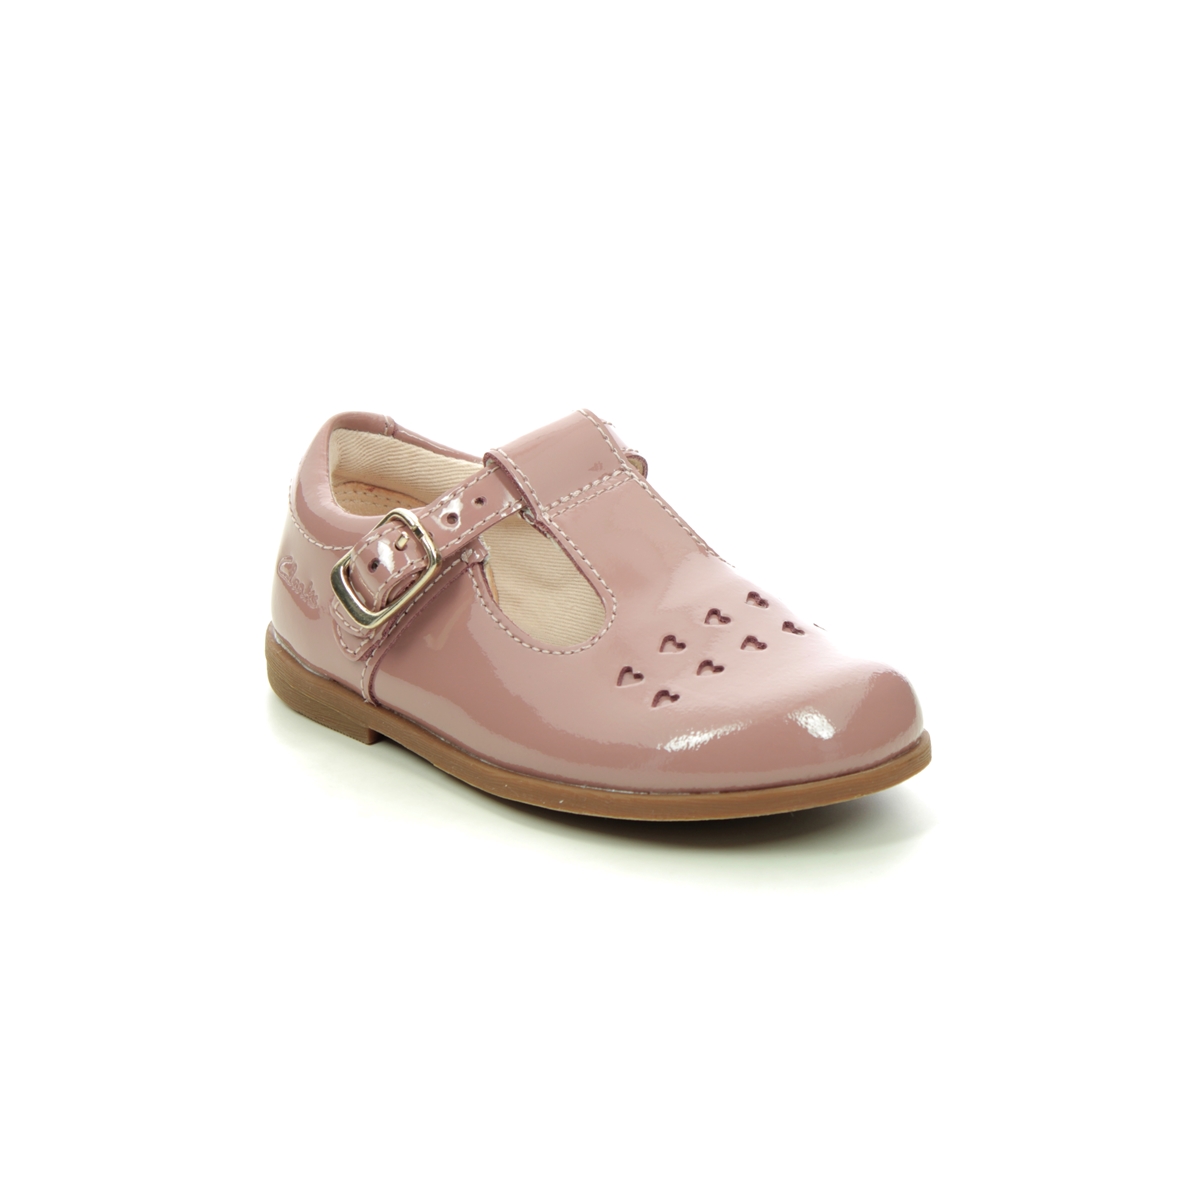 Clarks Drew Play T Pink Kids First And Toddler 651976F In Size 6 In Plain Pink F Width Fitting Regular Fit For kids